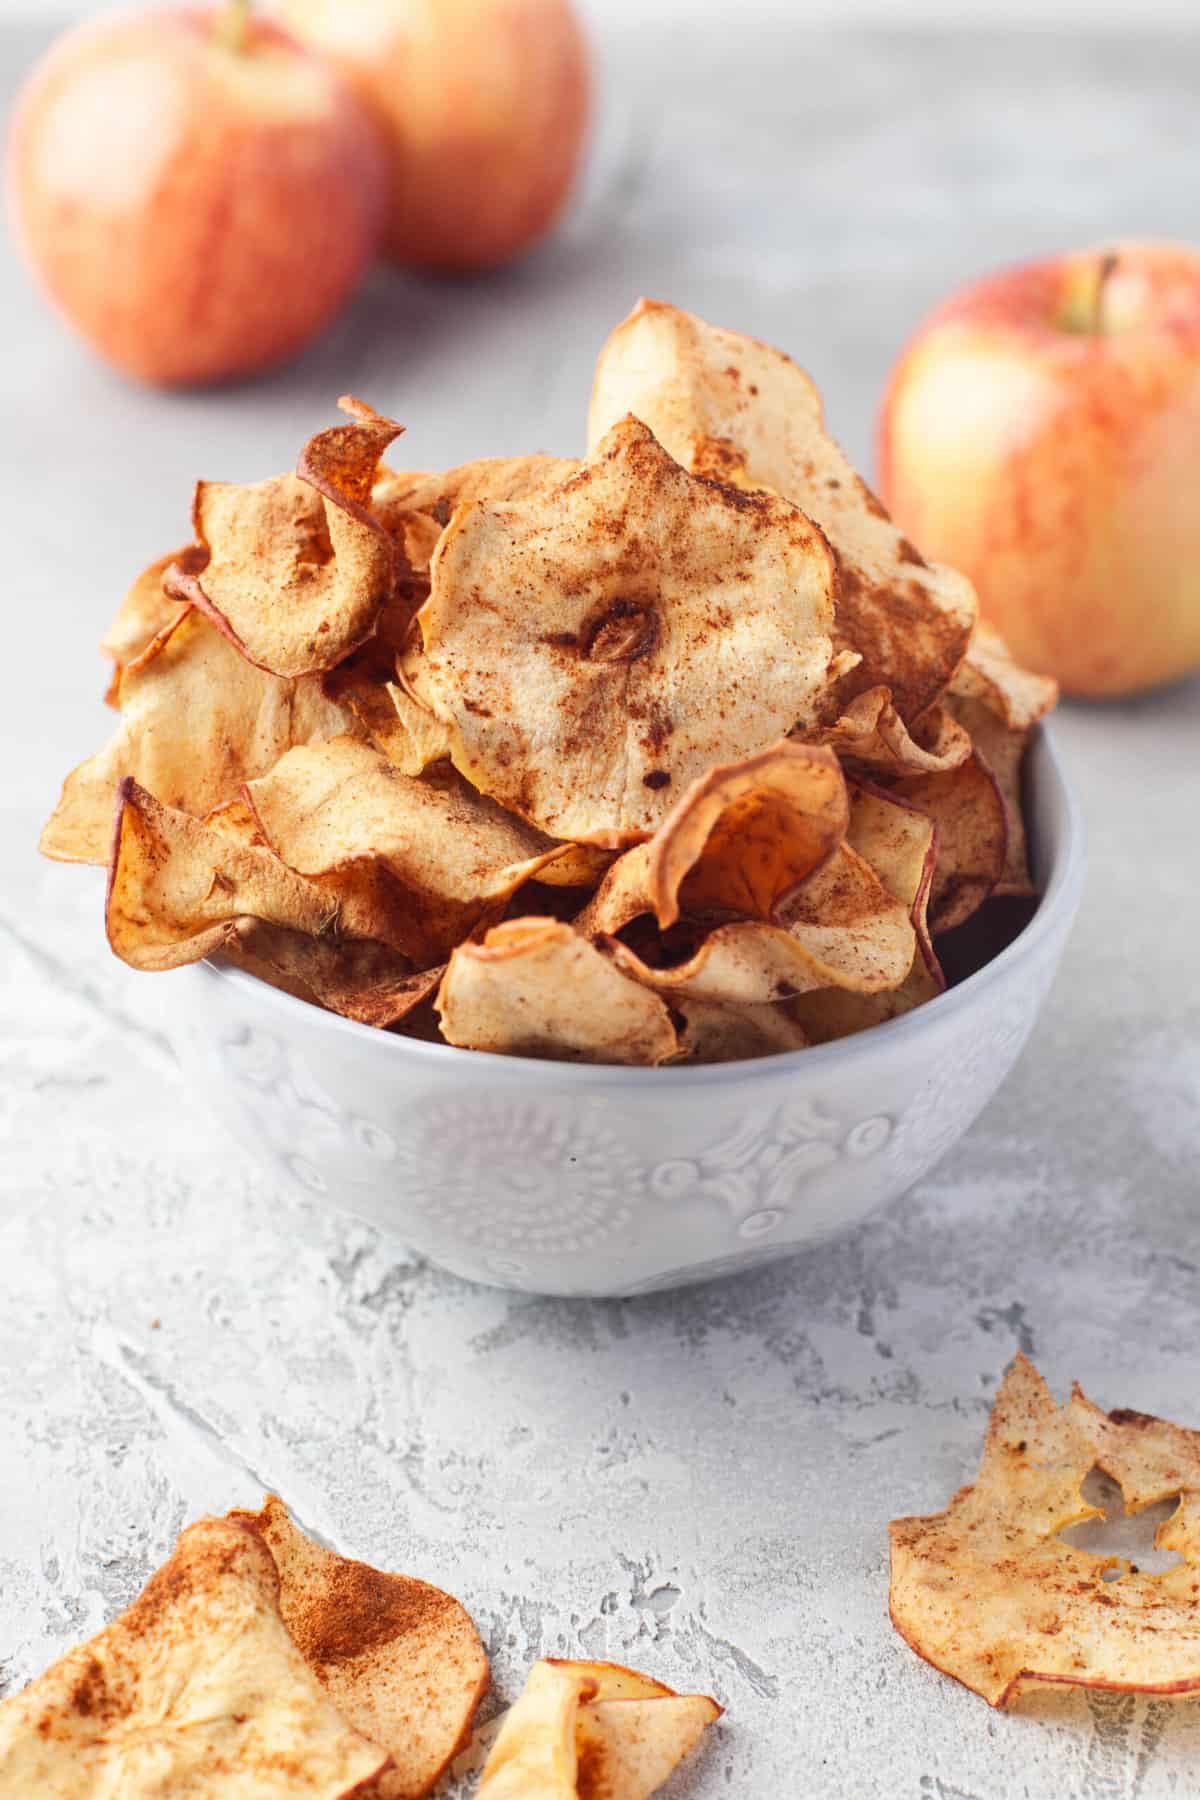 A bowl of apple chips in front of gala apples.